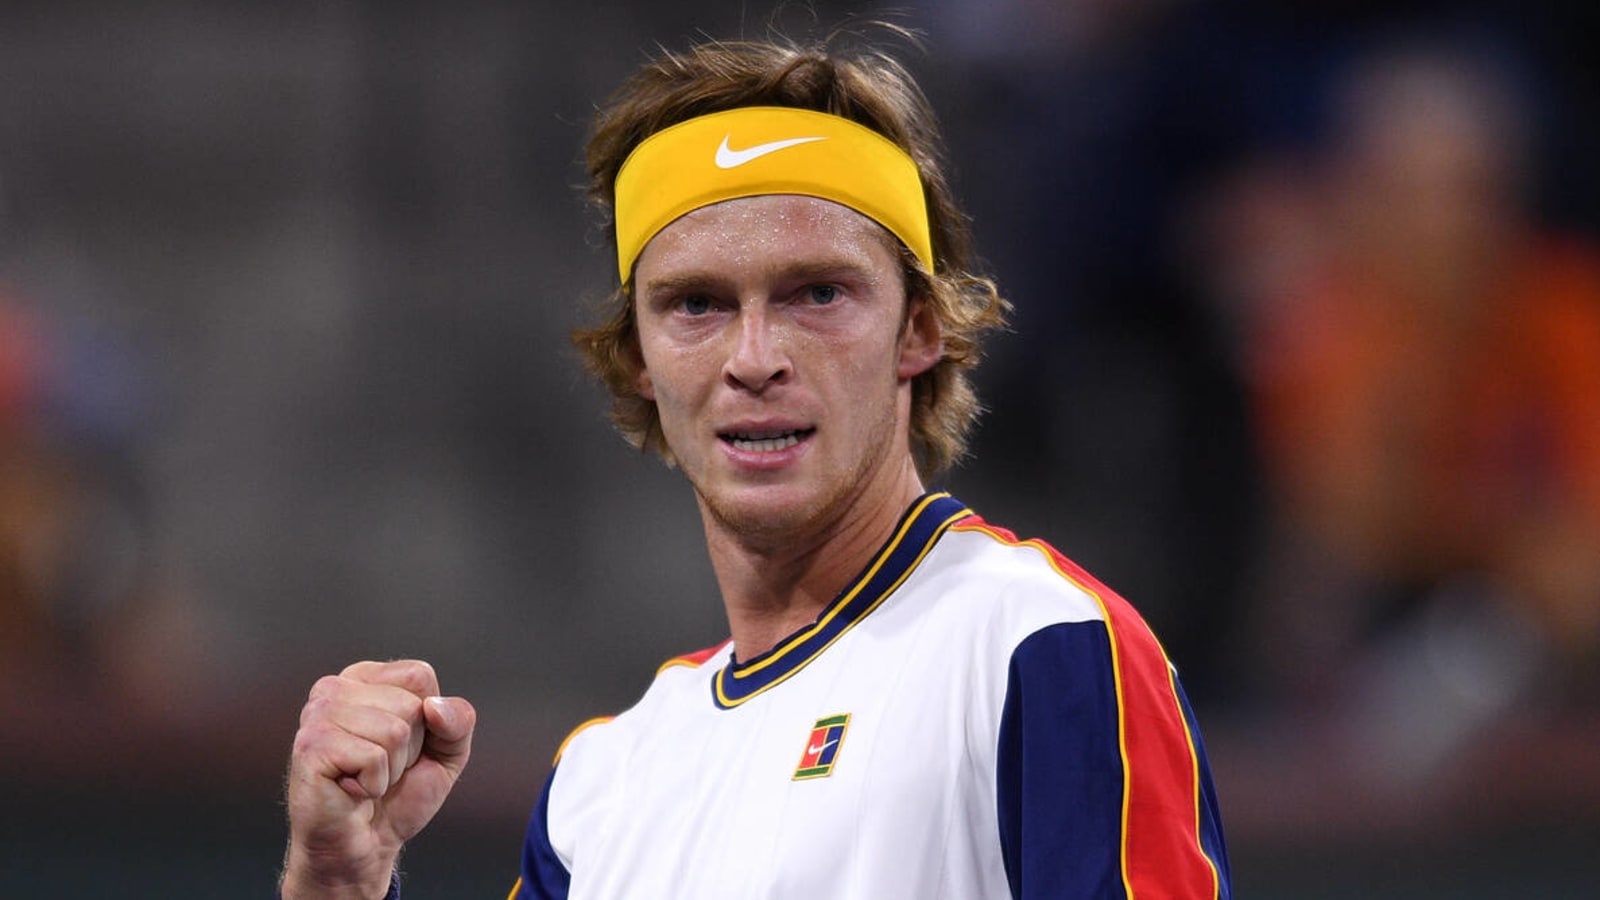 Russian tennis player Andrey Rublev writes 'No War Please' after win